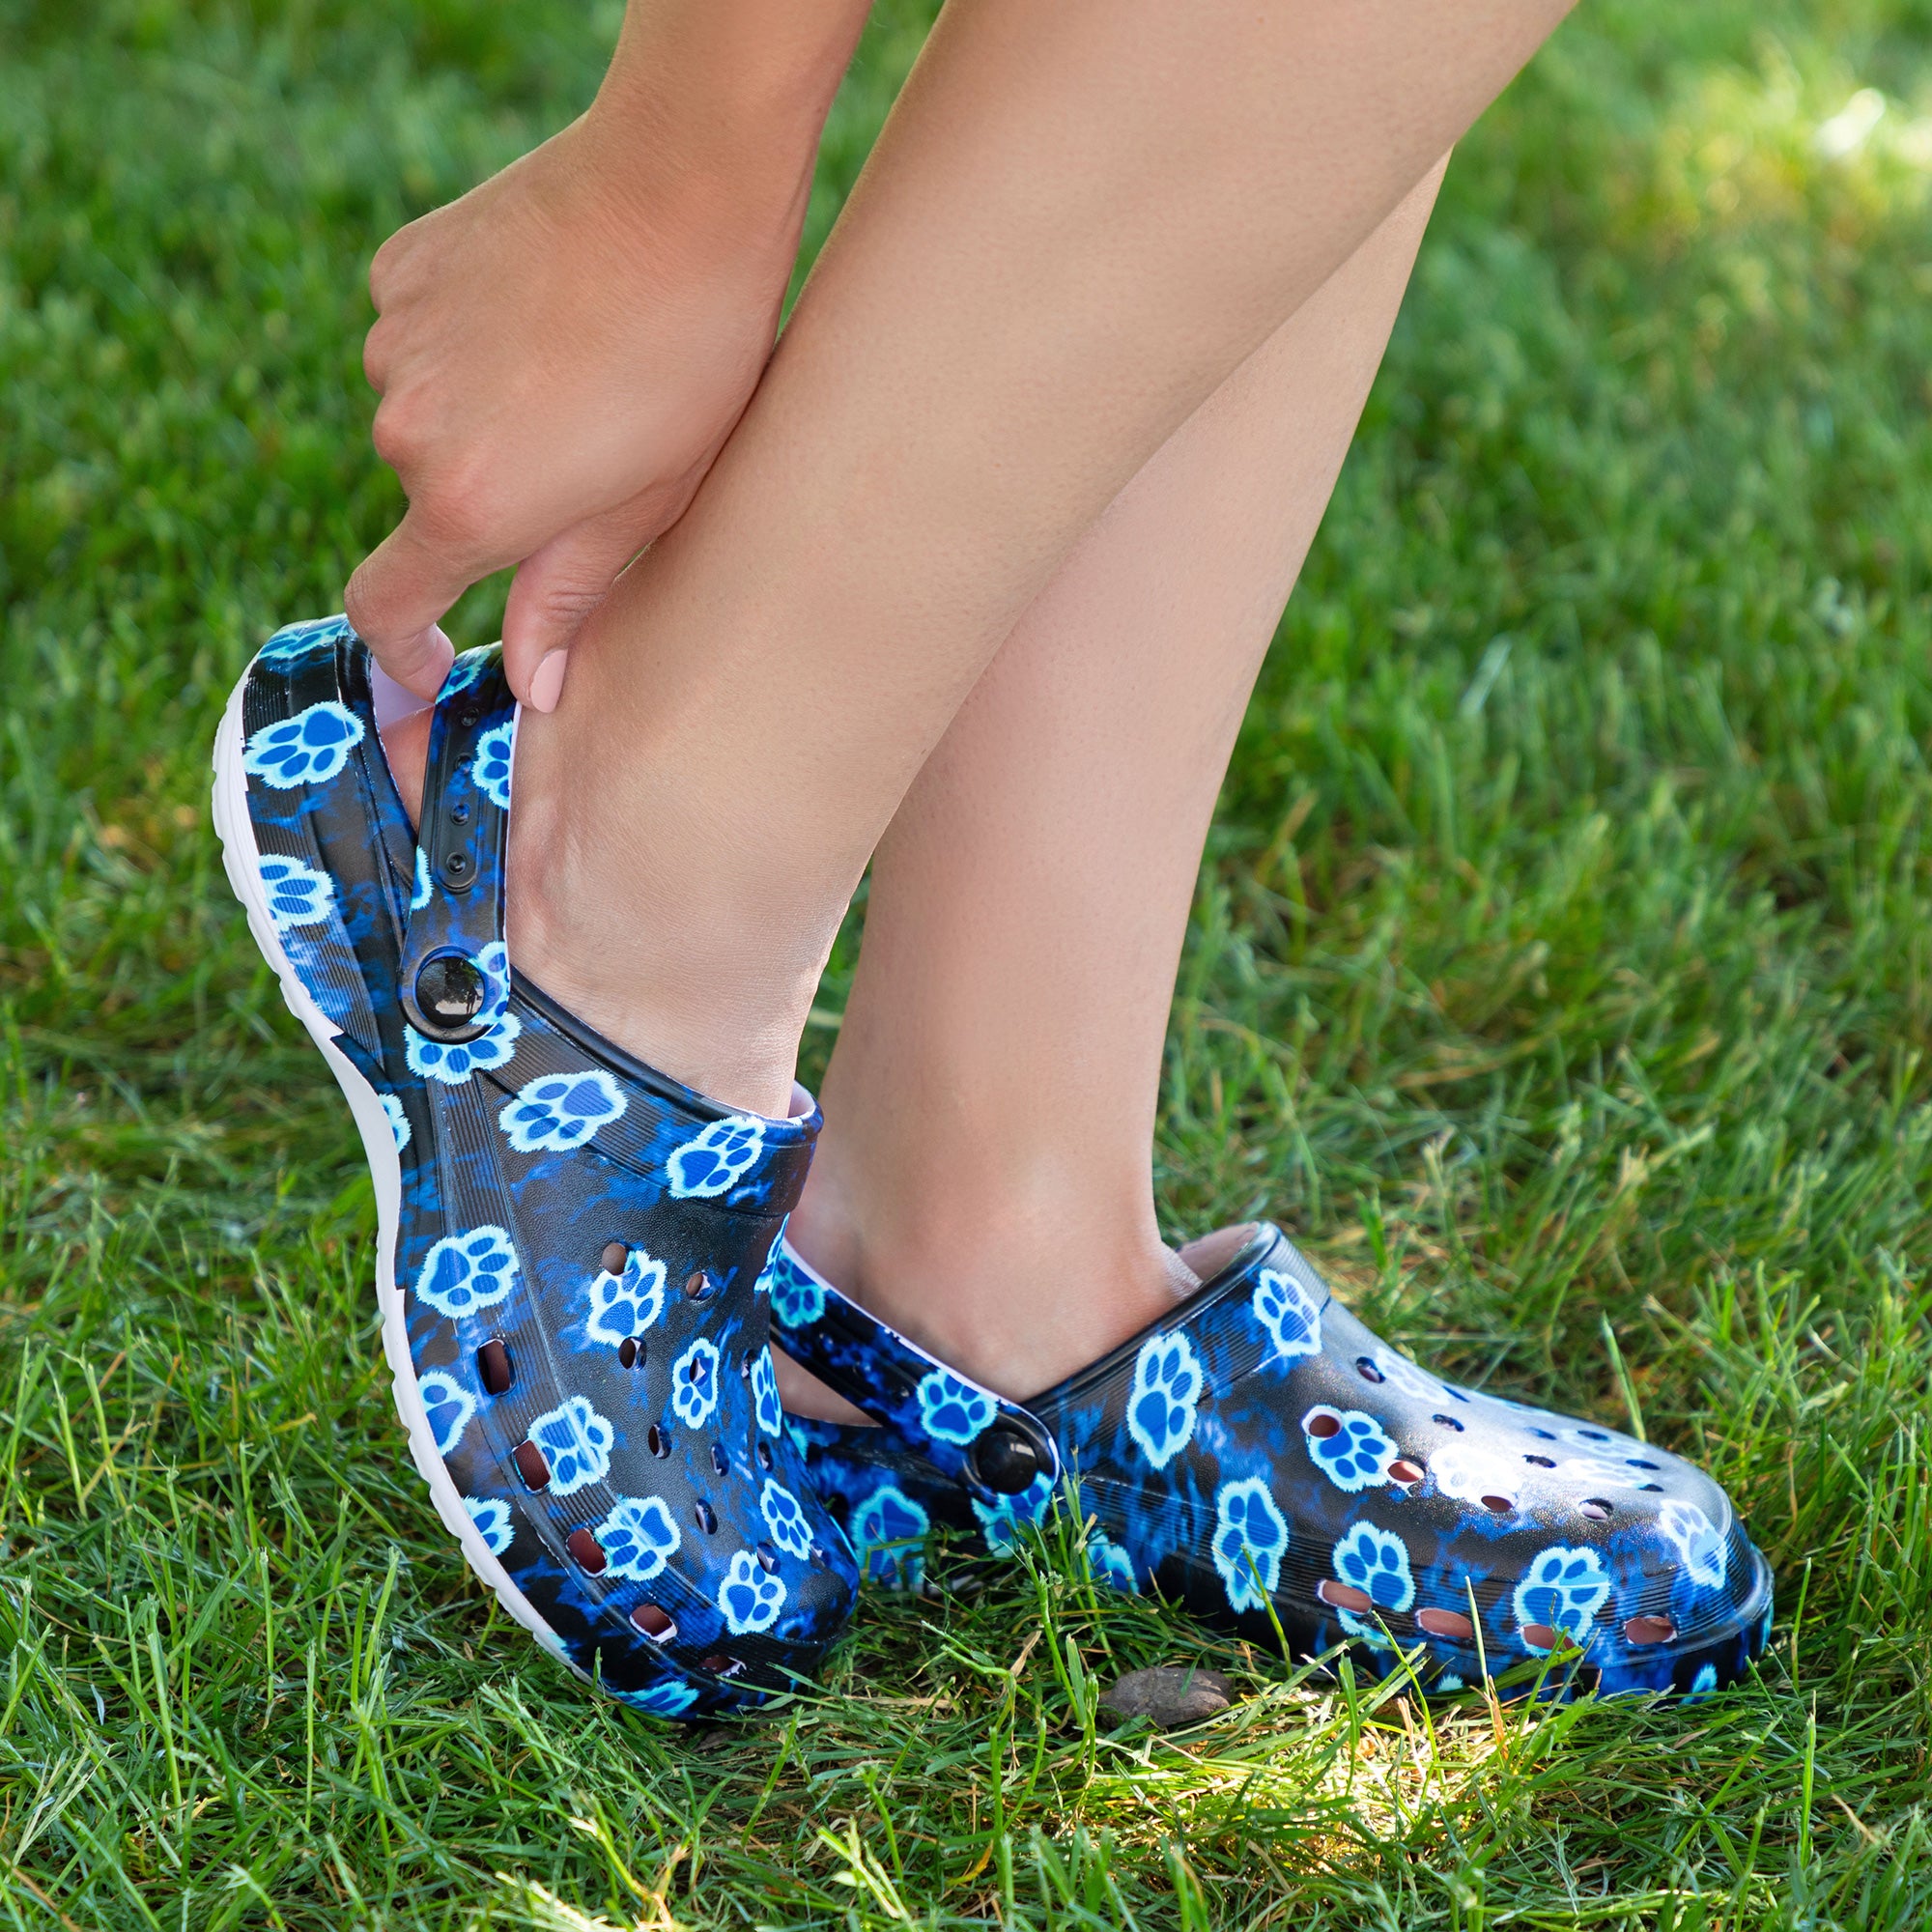 Super Comfy Paw Print Clogs - Glowing Paws - 6